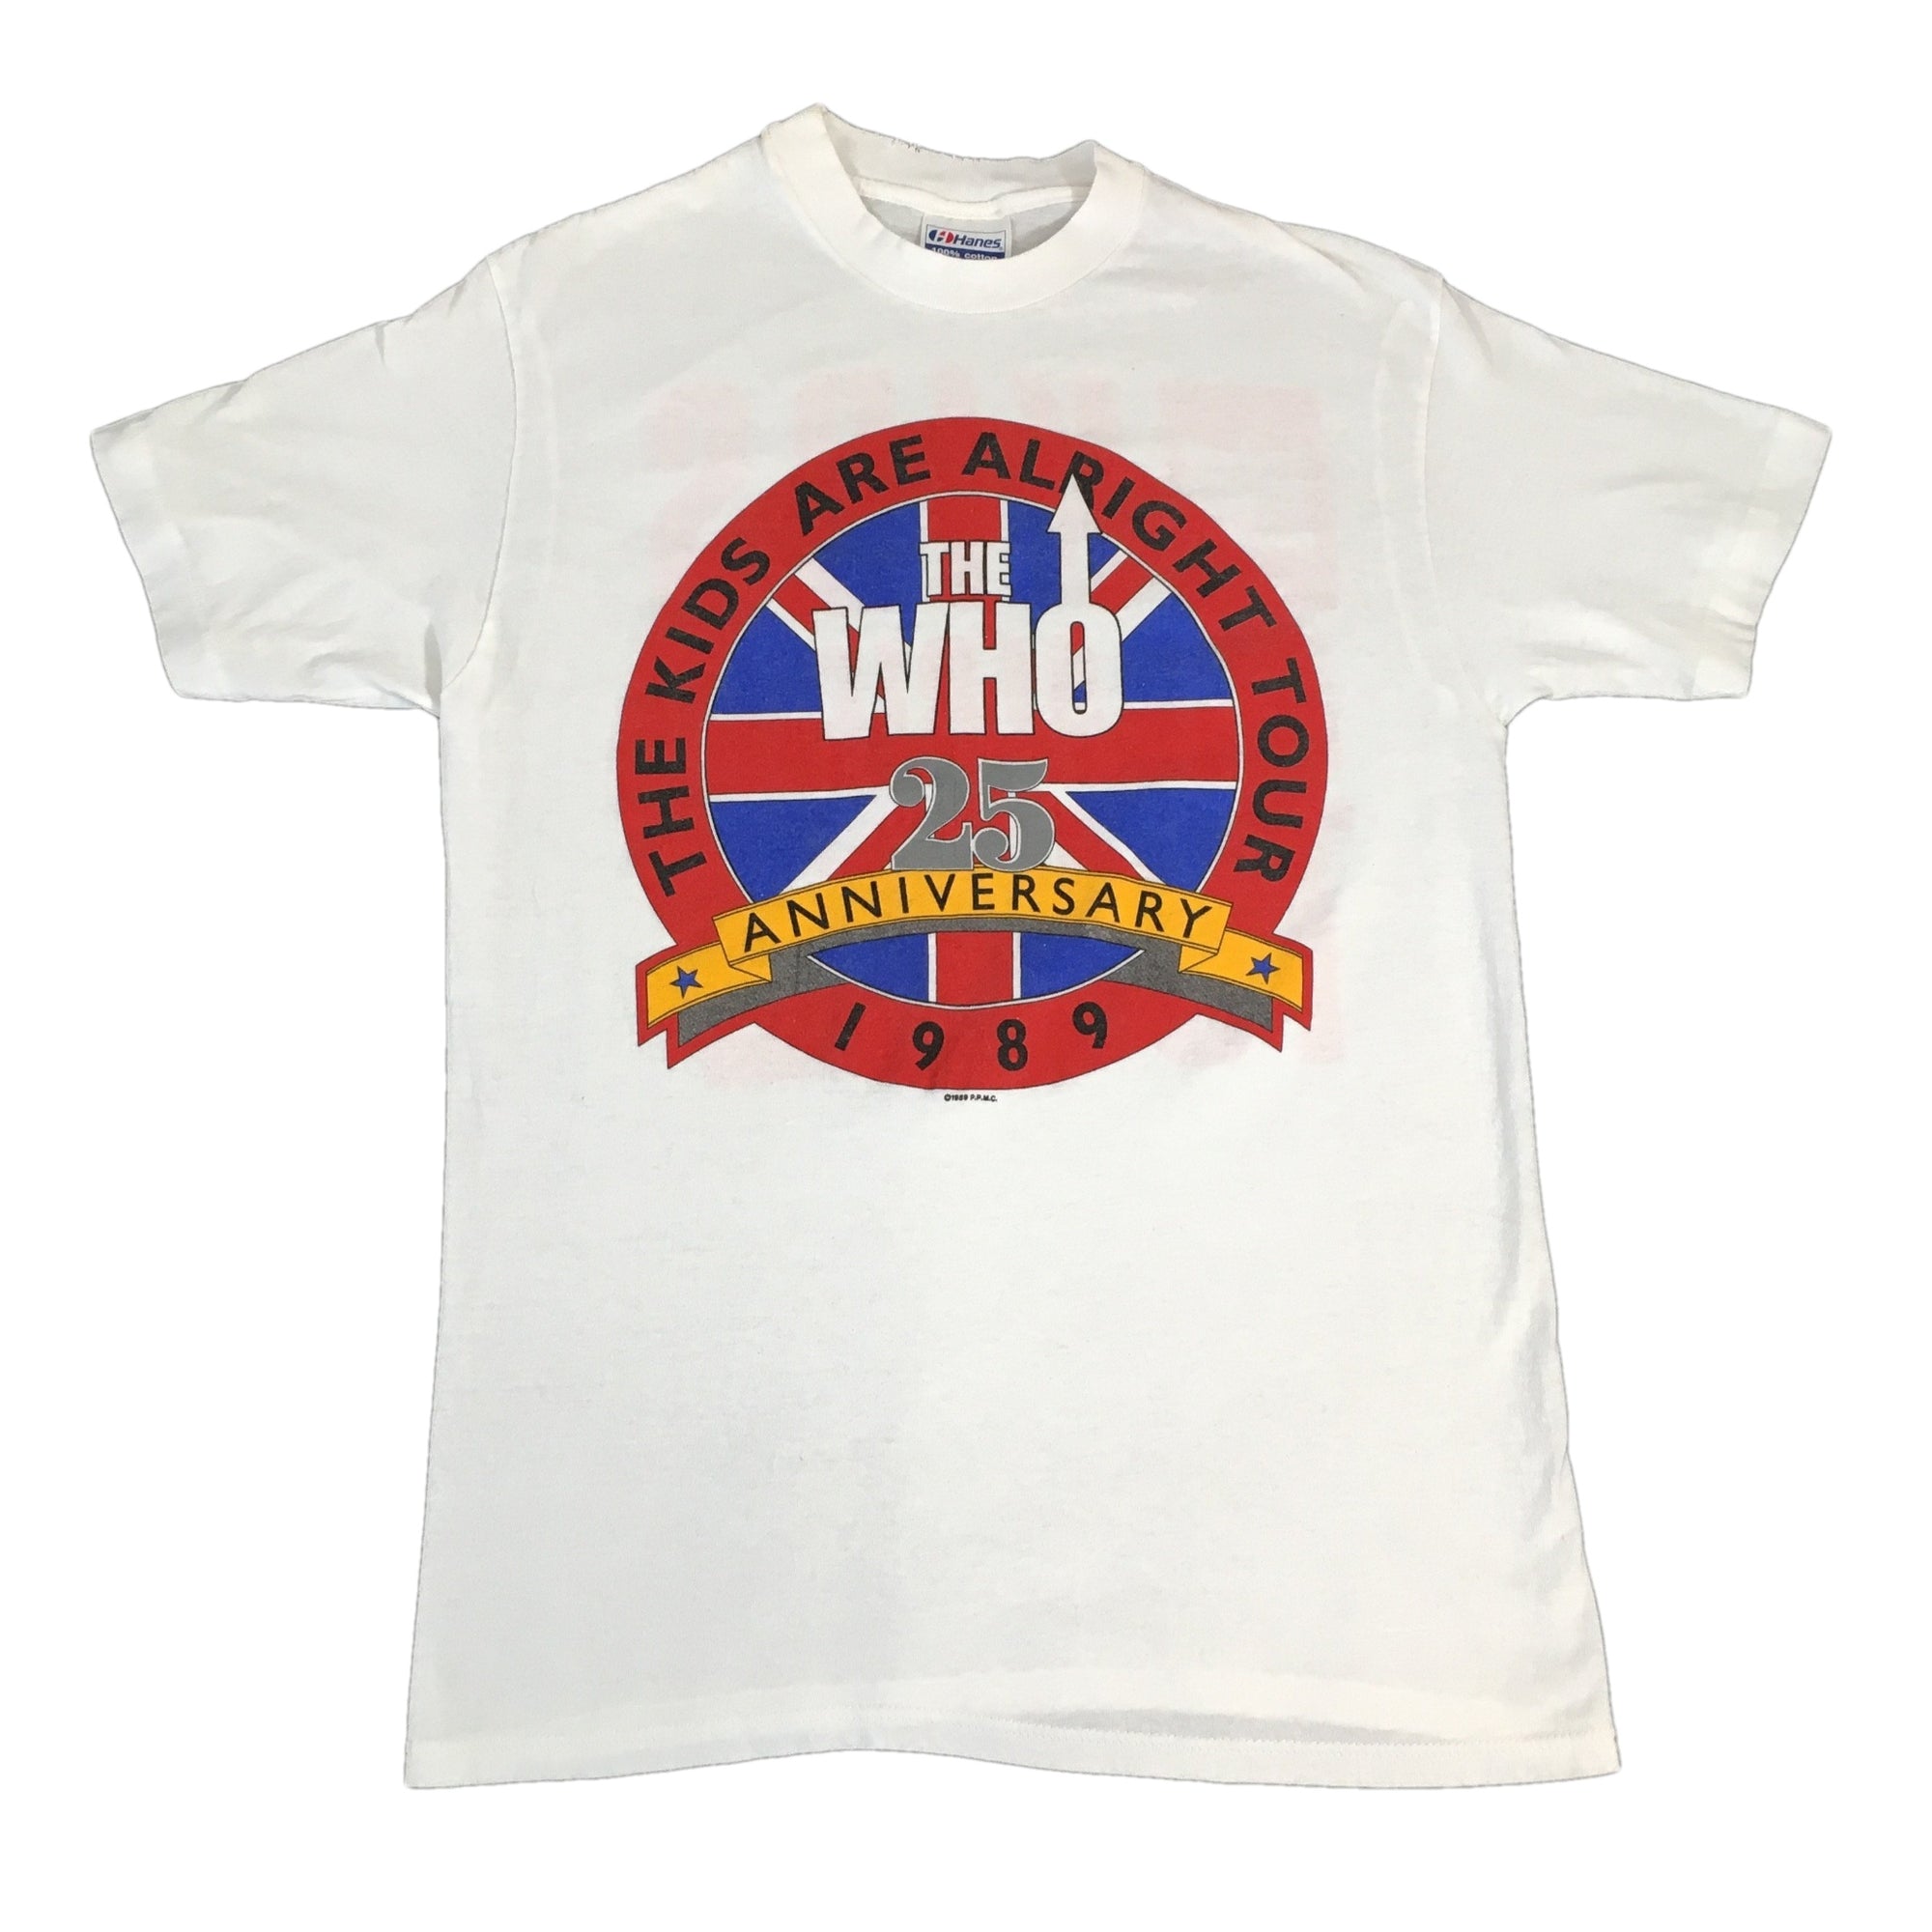 Vintage The Who "25th Anniversary" T-Shirt - jointcustodydc